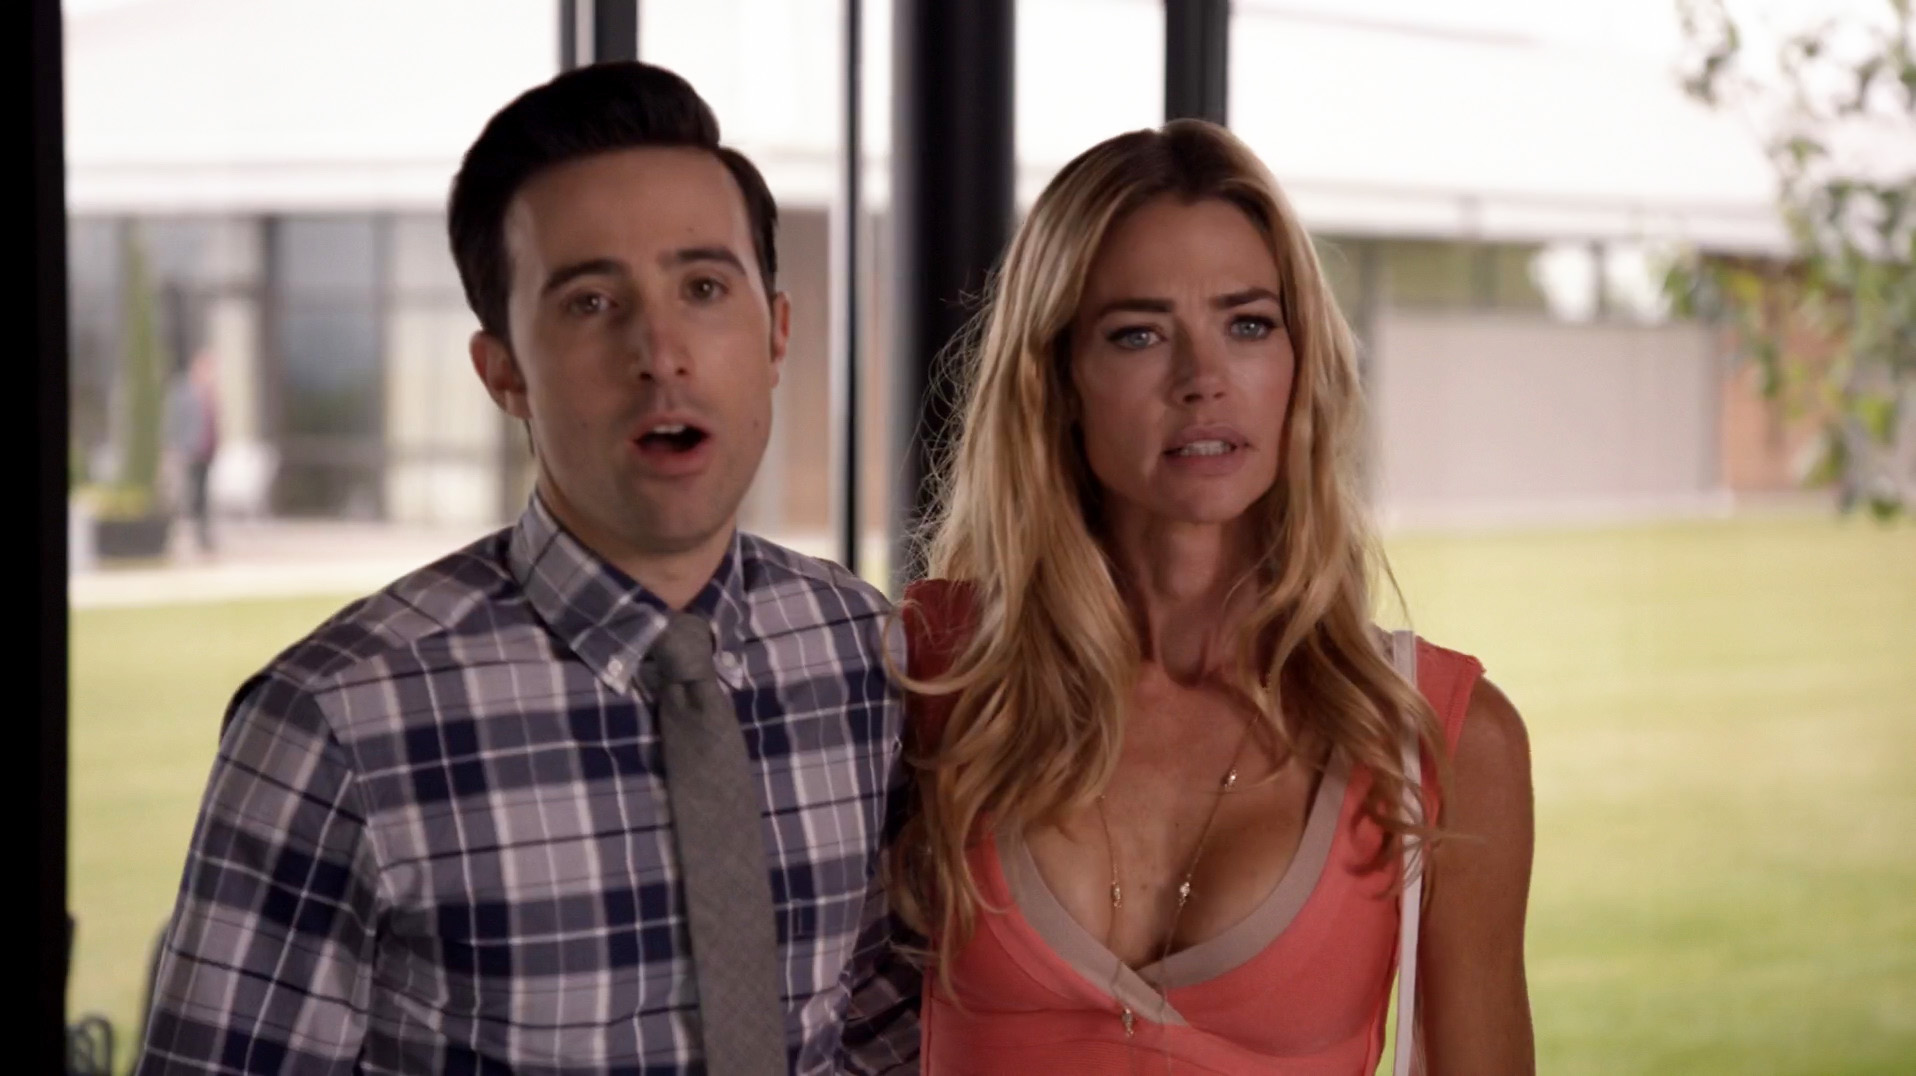 Denise Richards - Significant Mother s01e02 (2015) HD 1080p